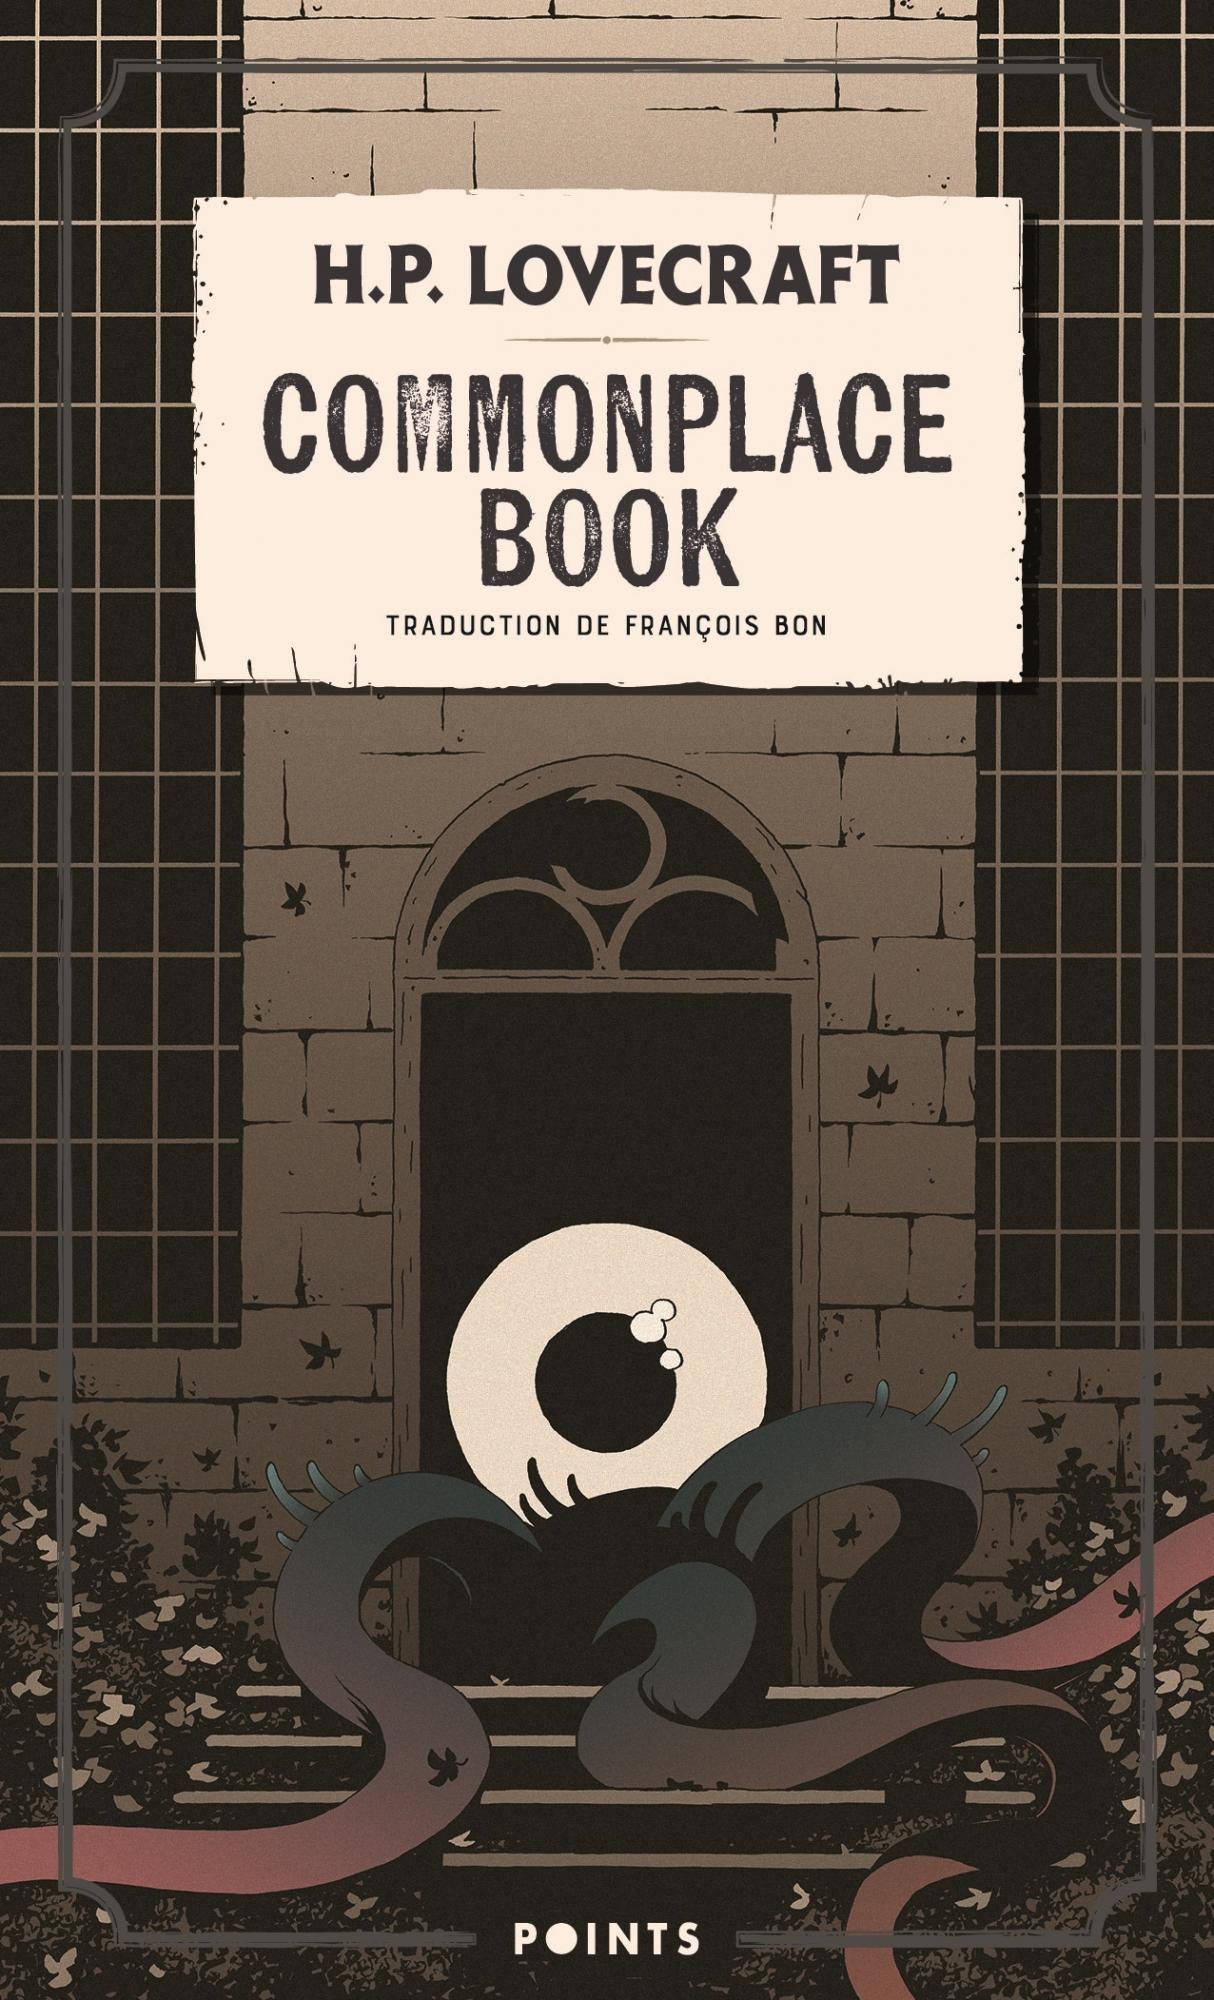 Commonplace book - H.P. Lovecraft